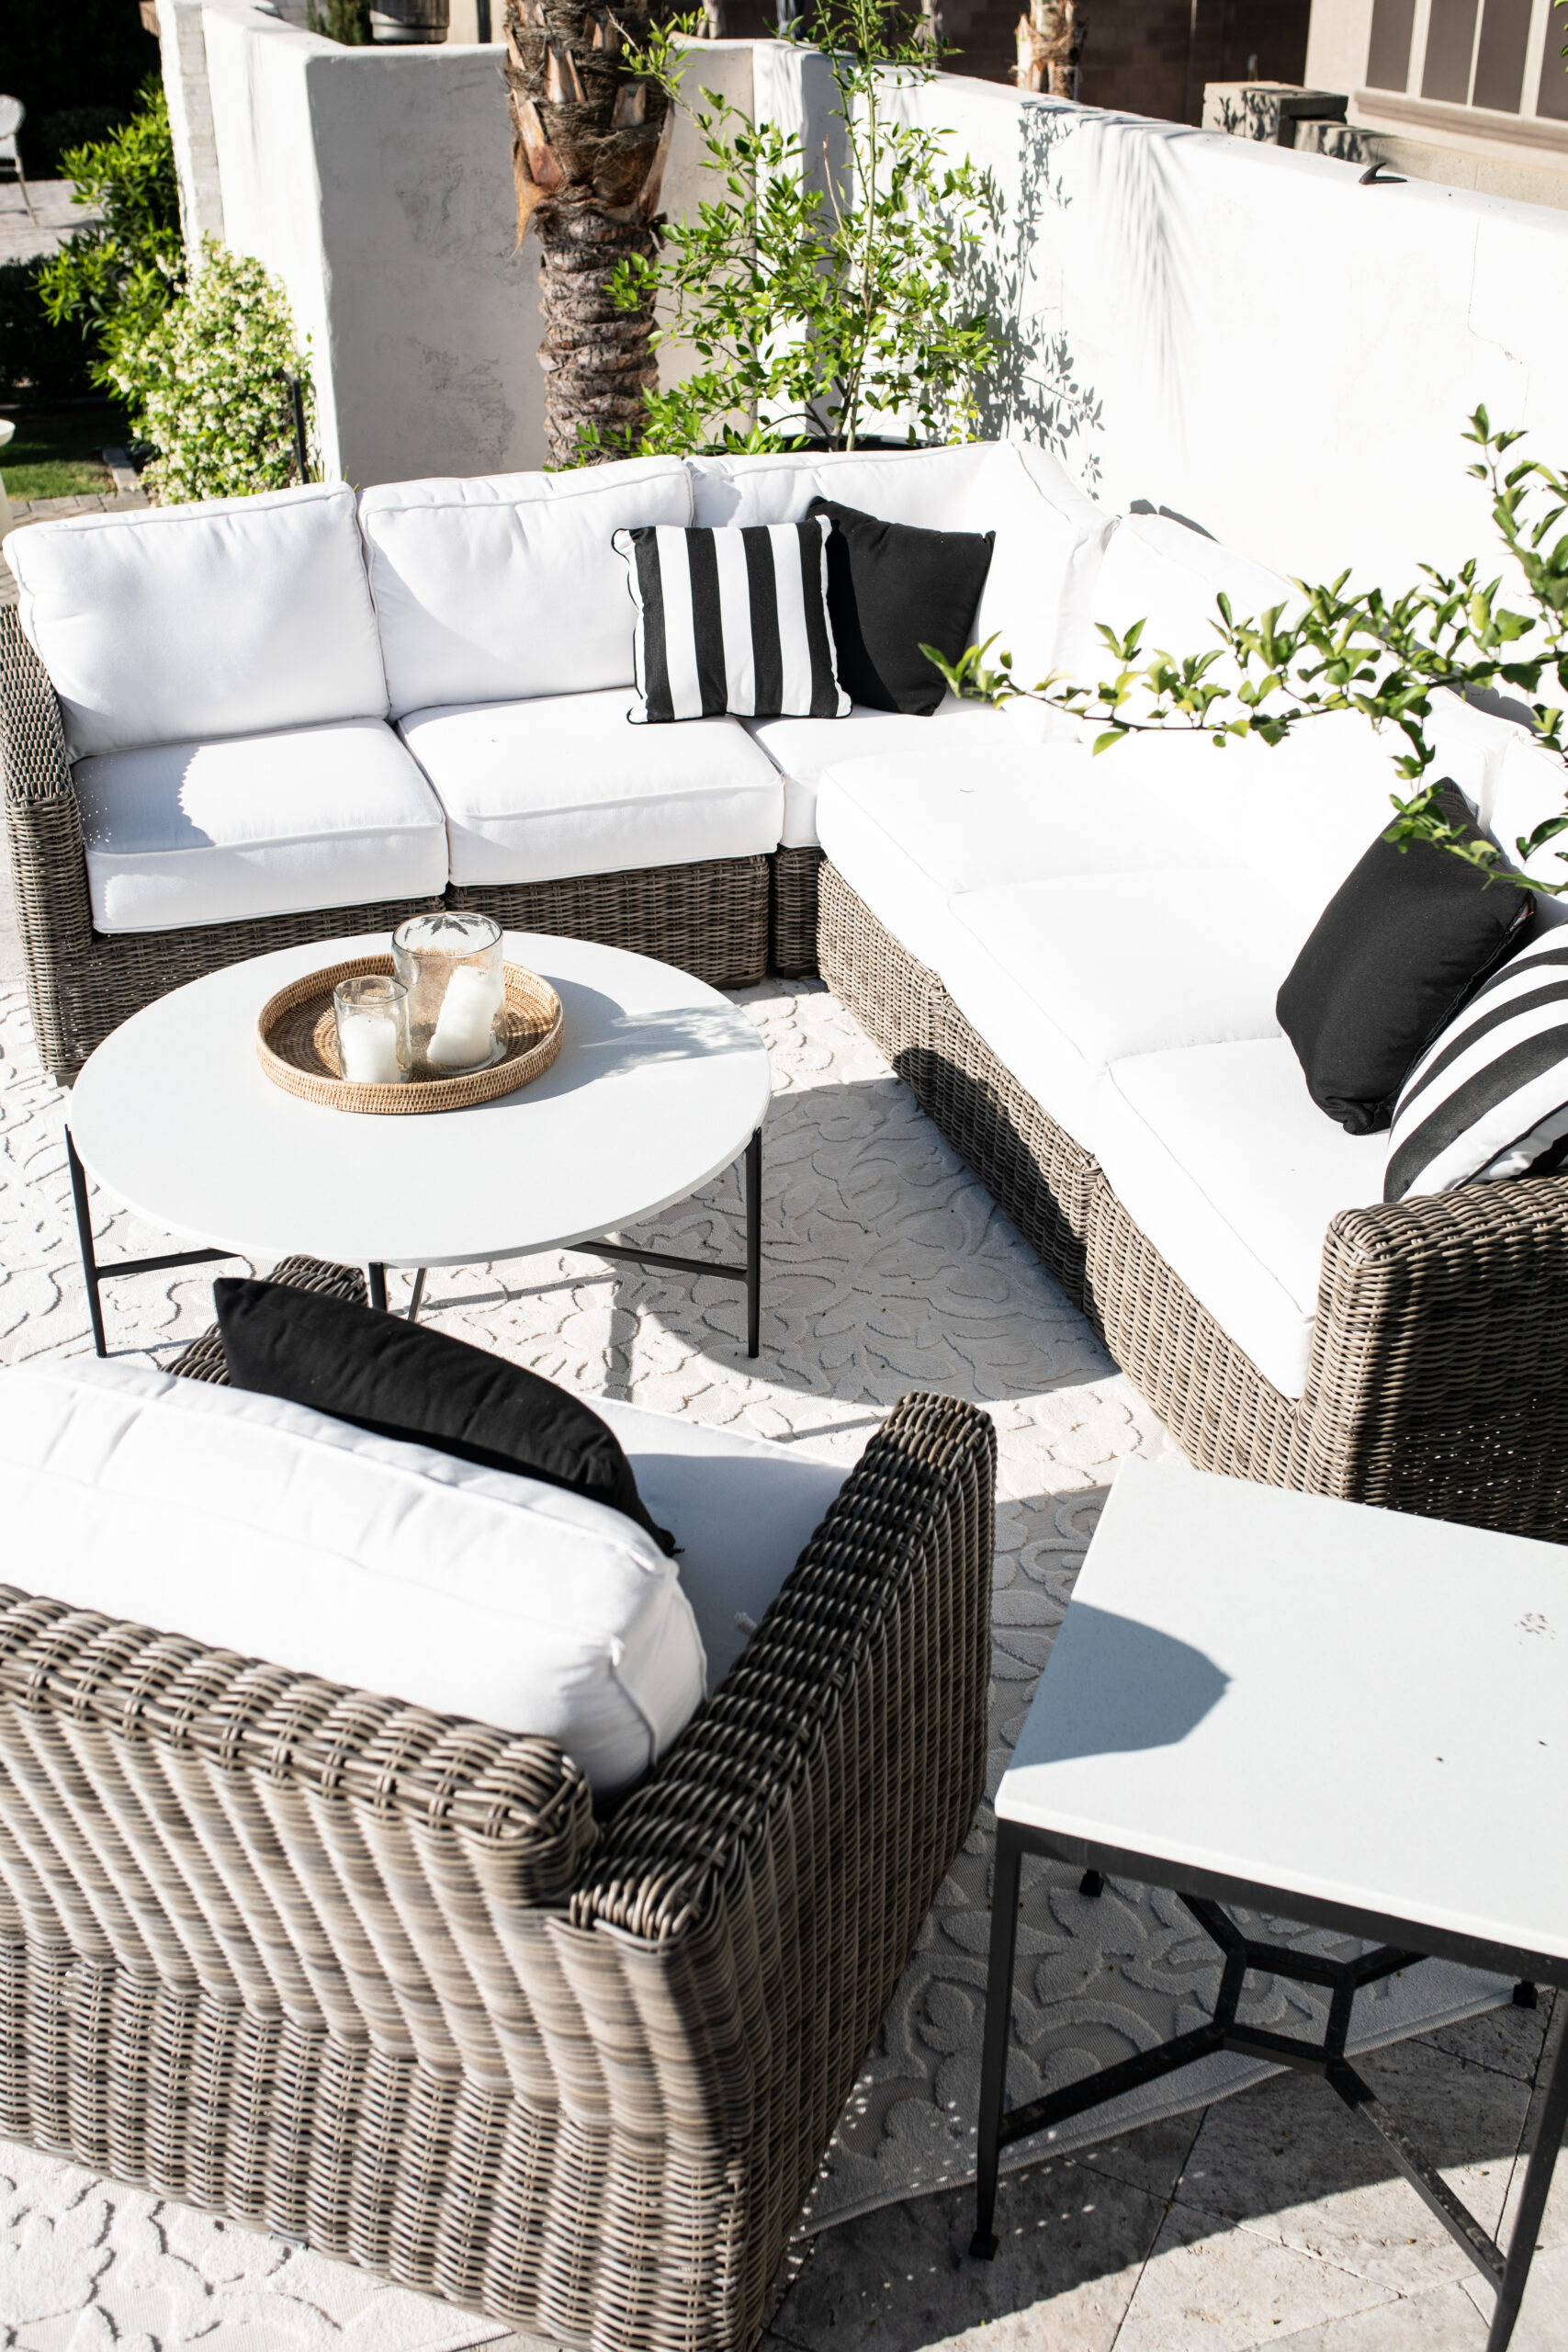 How to Bring Your Interior Style Into your Outdoor Spaces